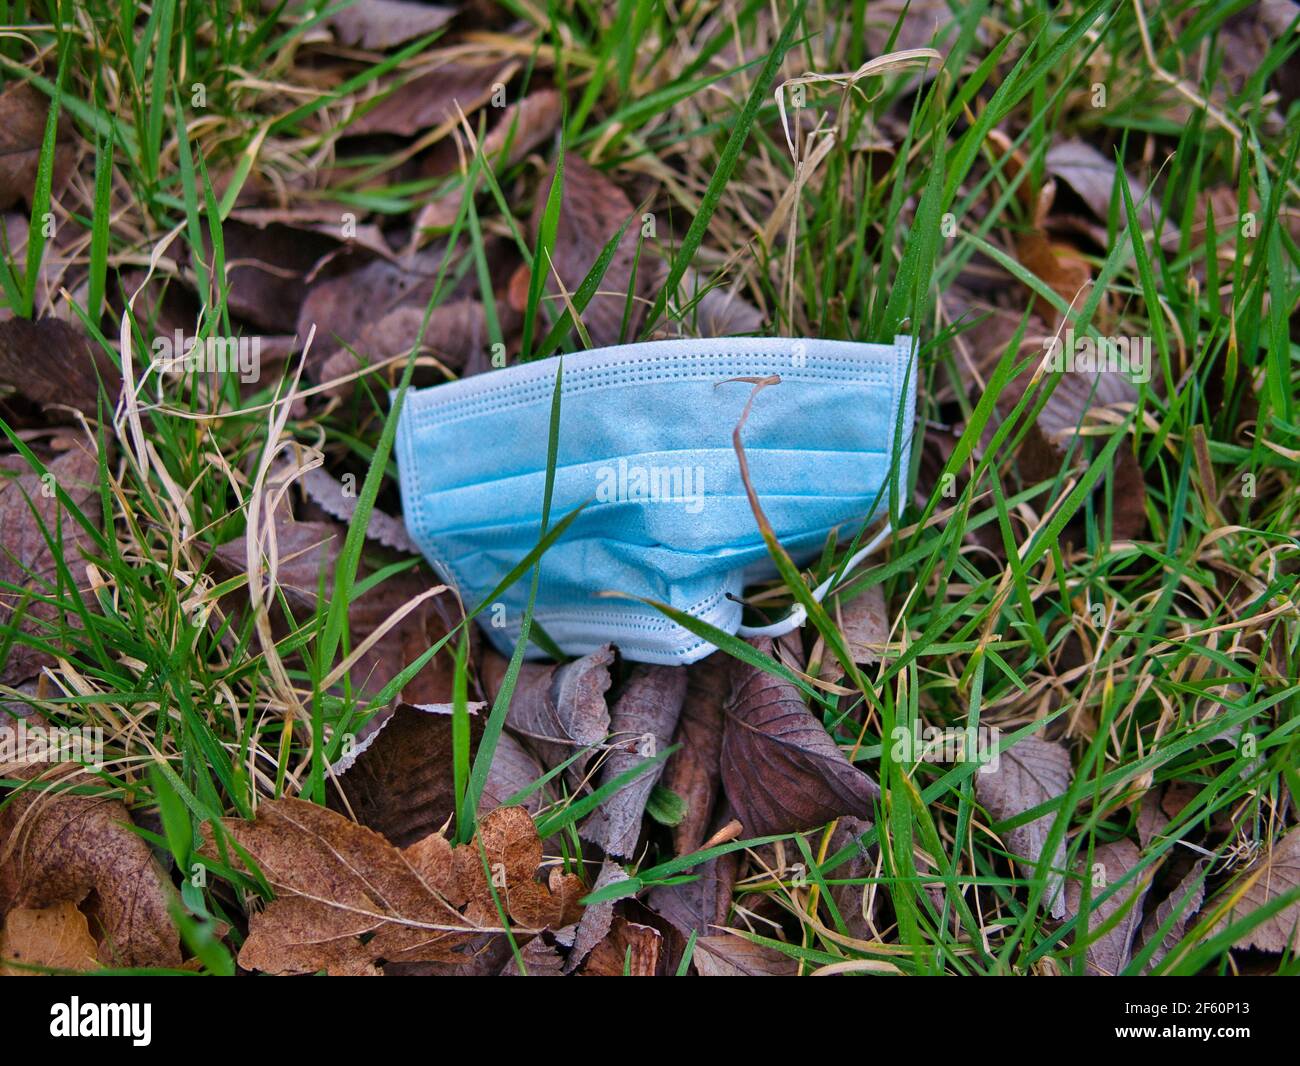 A used, blue surgical mask used for COVID-19 PPE protection, discarded as litter by a rural countryside hedgerow causing environmental pollution Stock Photo